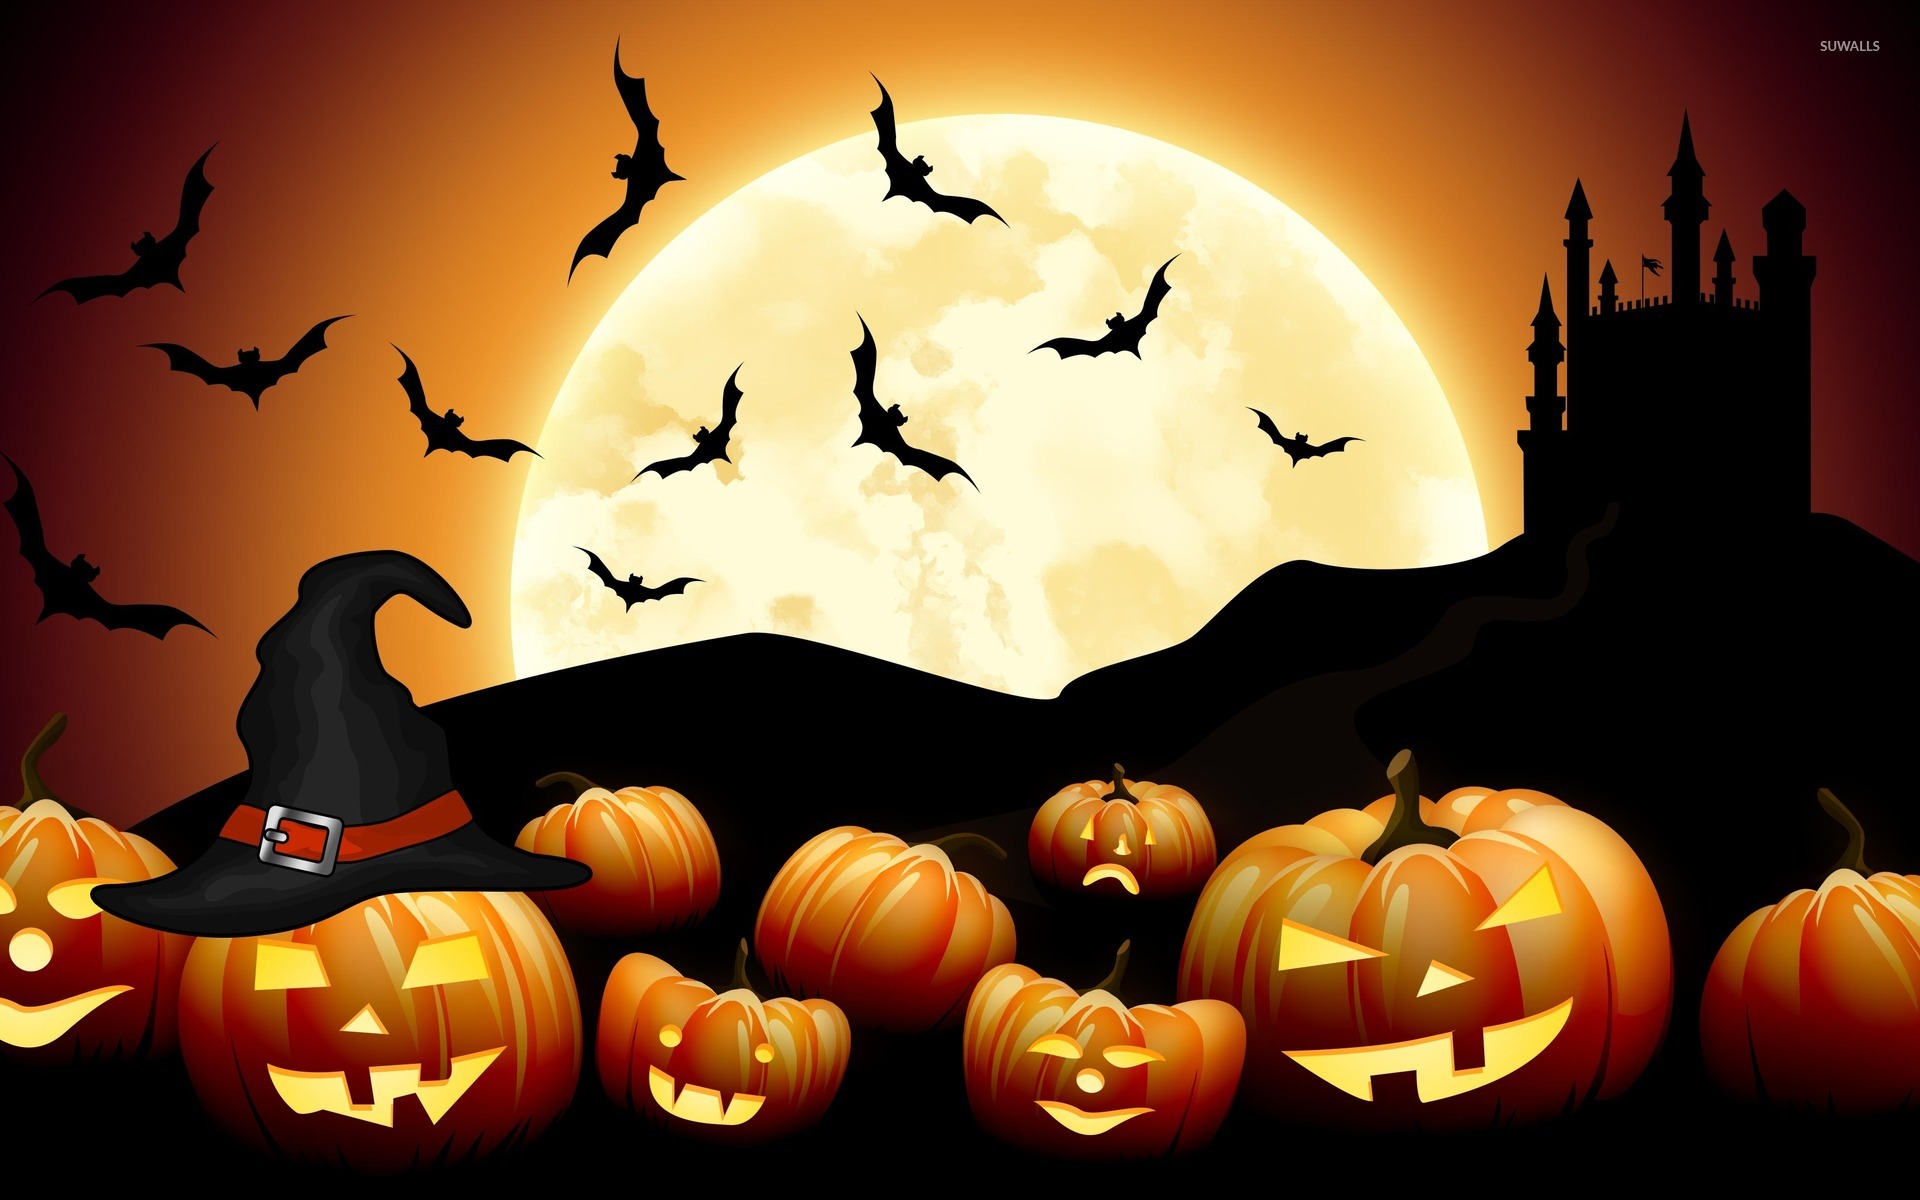 Bats flying over the jack-o'-lanterns wallpaper - Holiday wallpapers ...